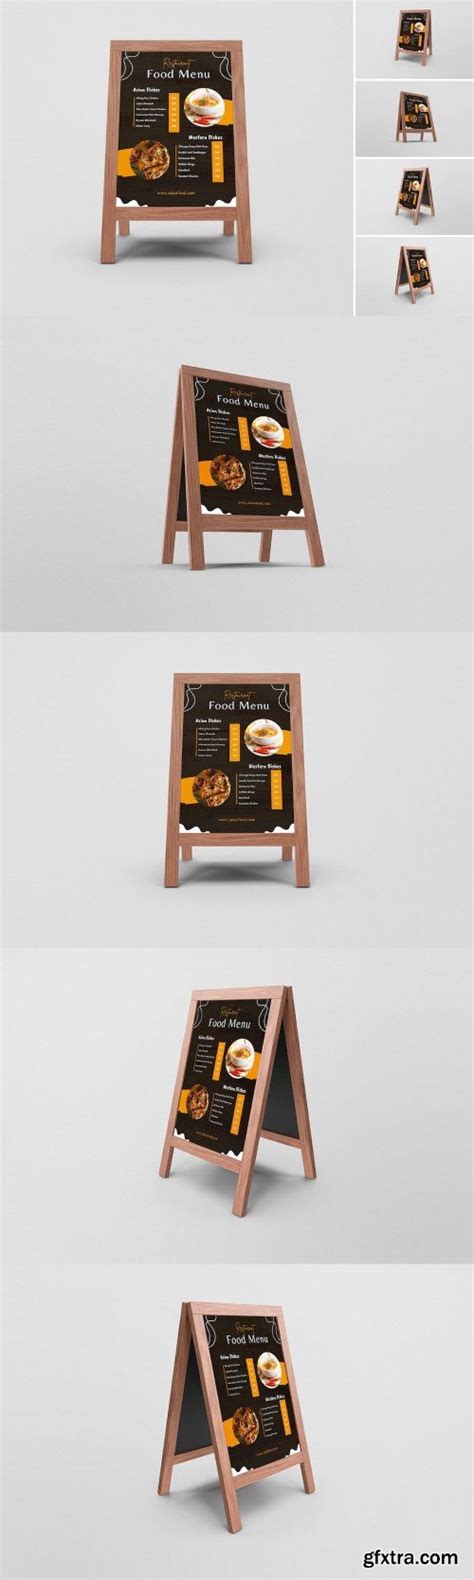 Advertising Board Stand Mockups Gfxtra